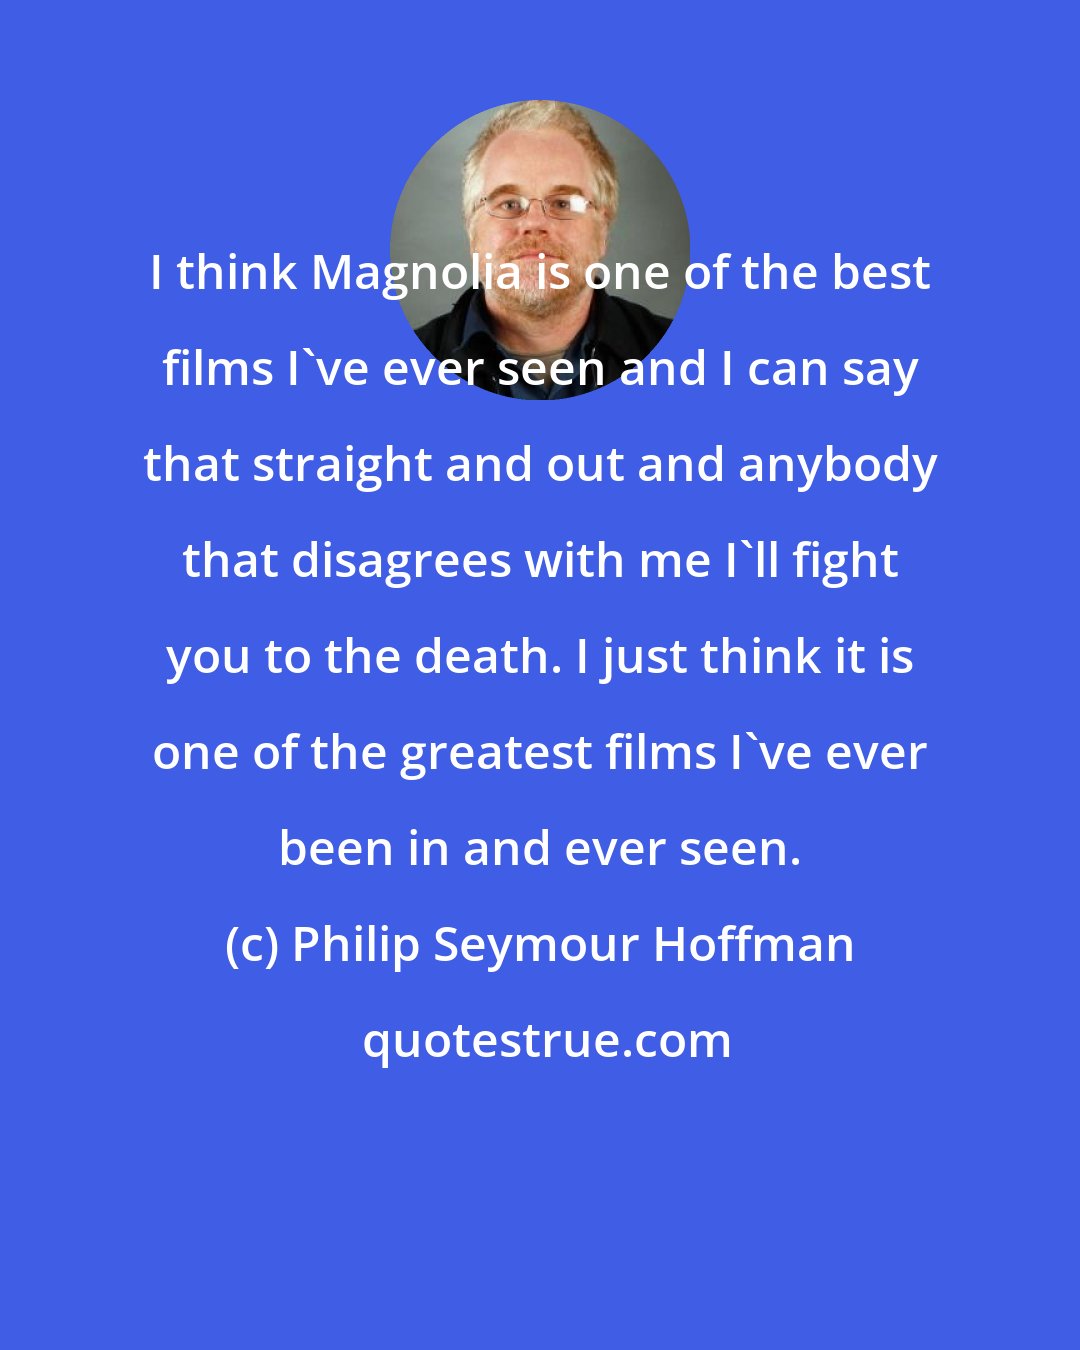 Philip Seymour Hoffman: I think Magnolia is one of the best films I've ever seen and I can say that straight and out and anybody that disagrees with me I'll fight you to the death. I just think it is one of the greatest films I've ever been in and ever seen.